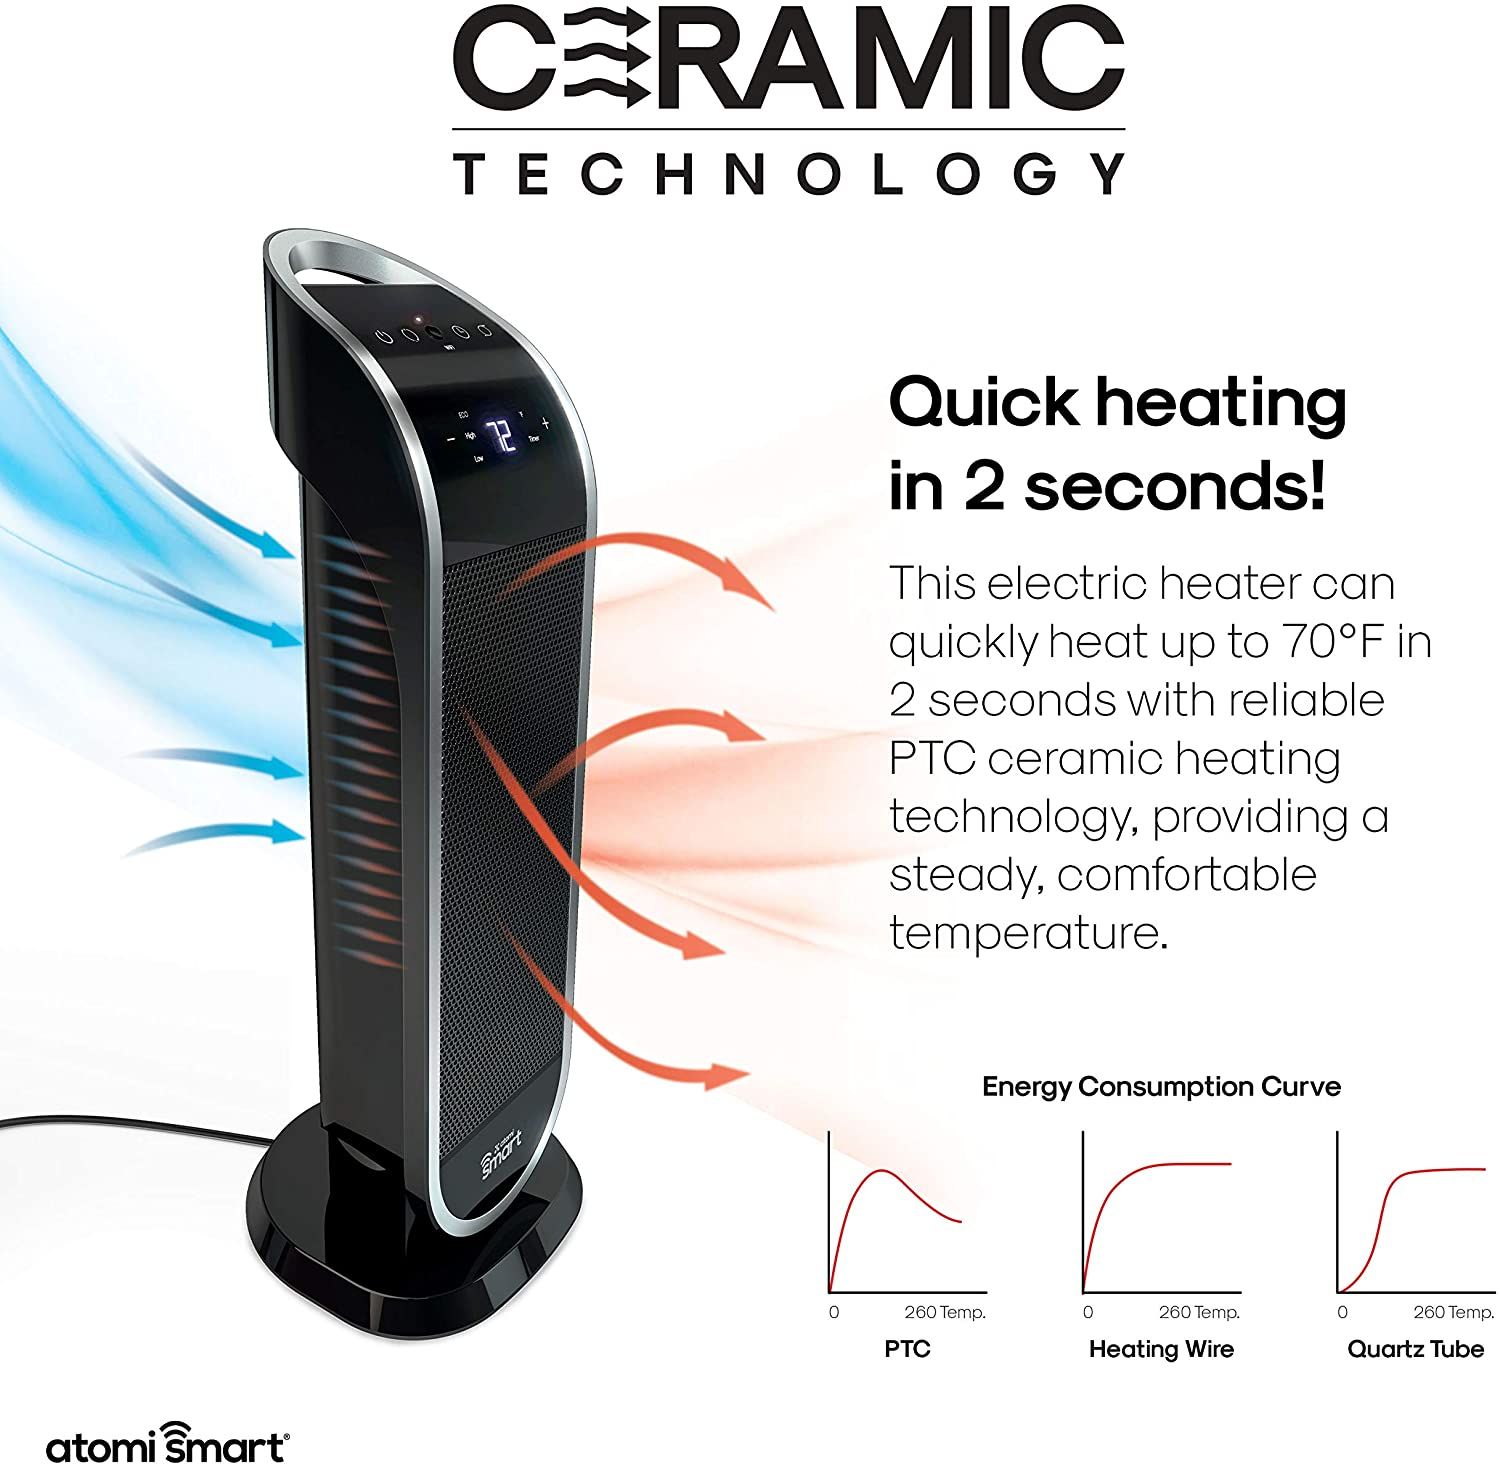 A visual showing the quick heating capability for Atomi tower space heater